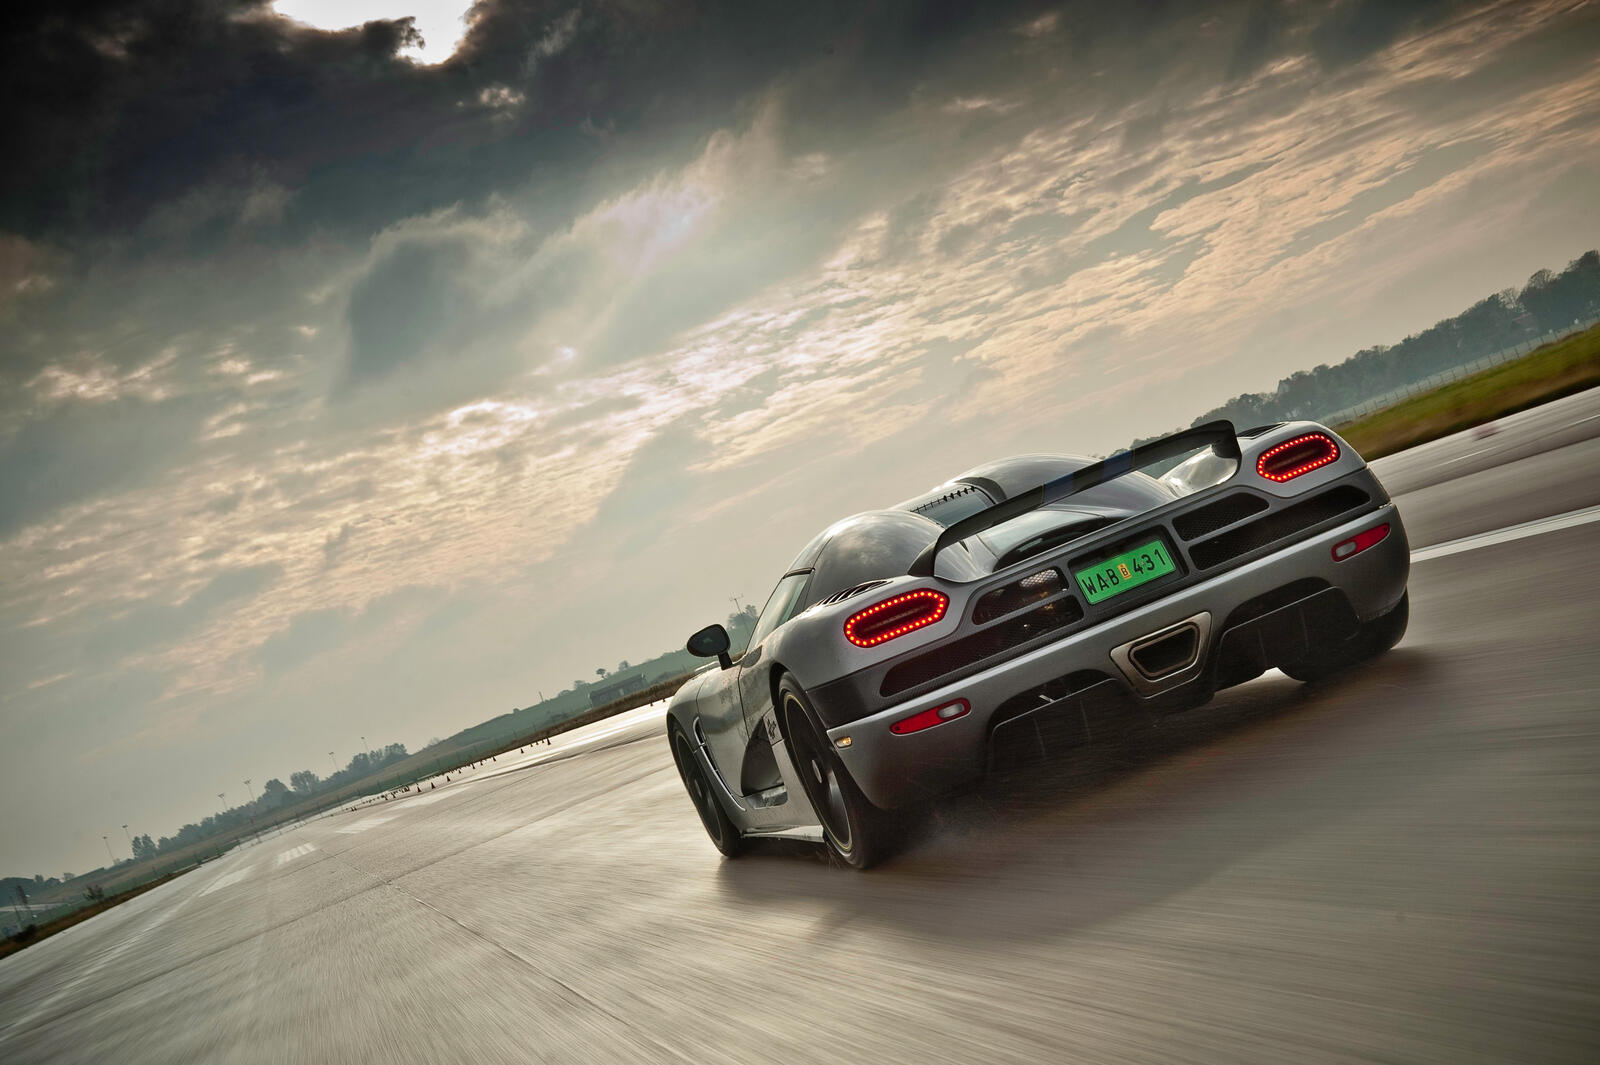 Free photo The Koenigsegg Agera rides at high speed rear view